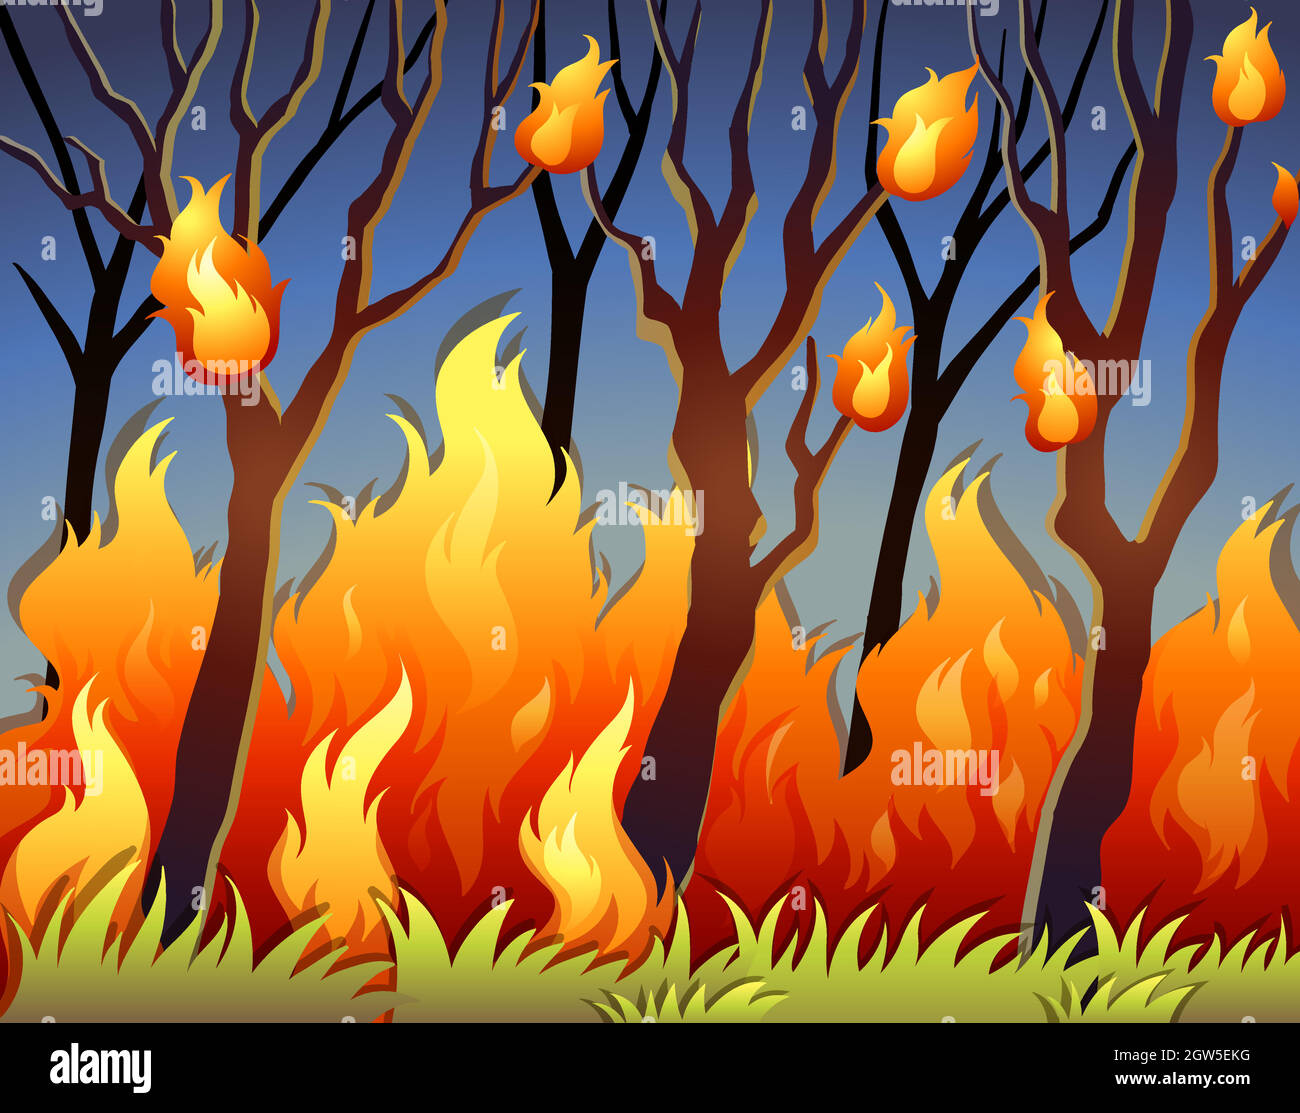 Trees in forest on fire Stock Vector